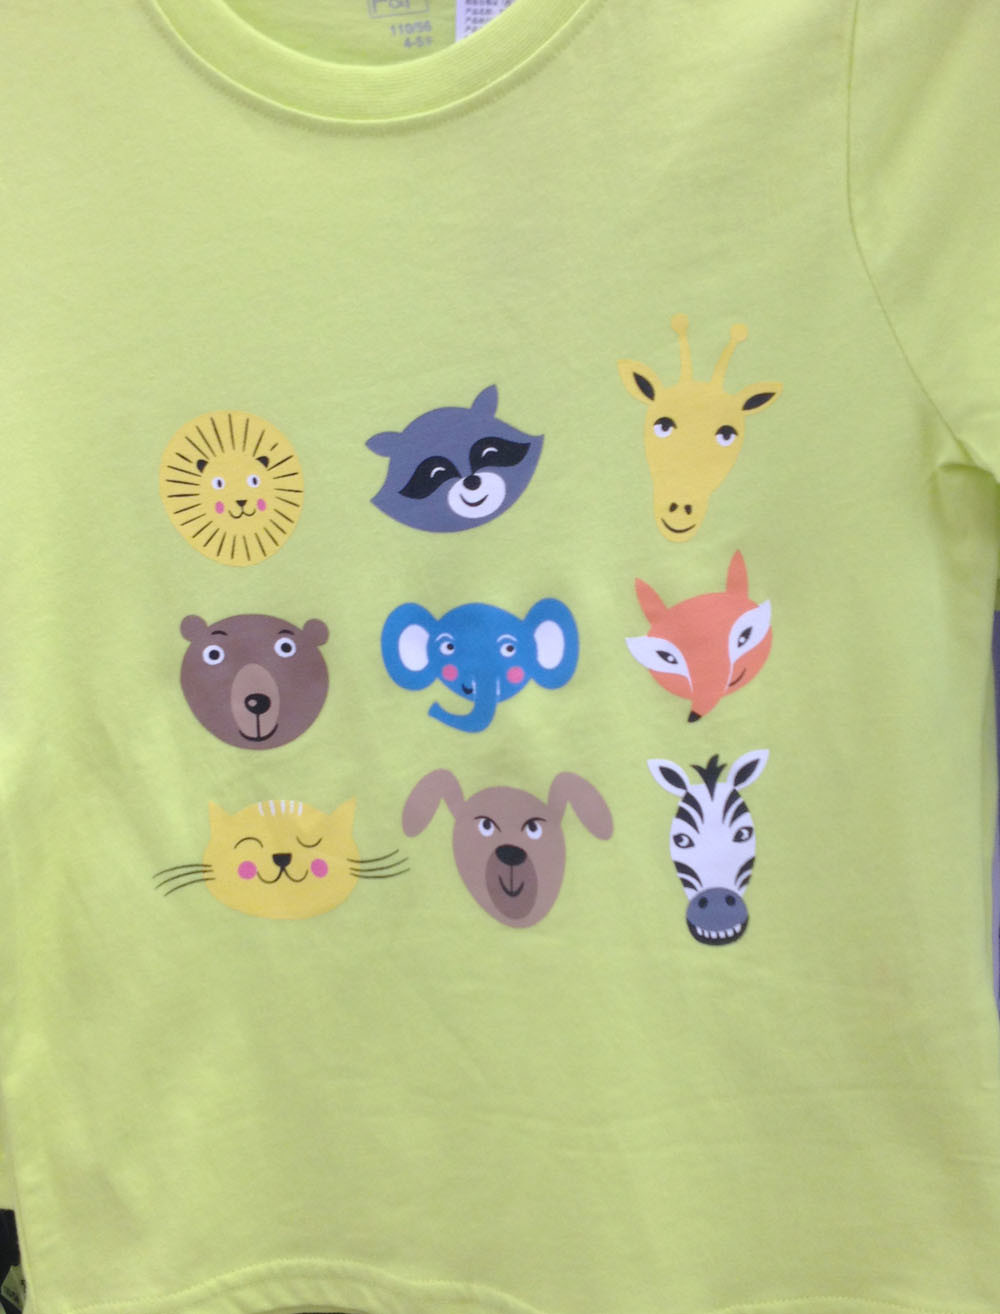 Custom Printed Iron on Stickers for Children's T-Shirts